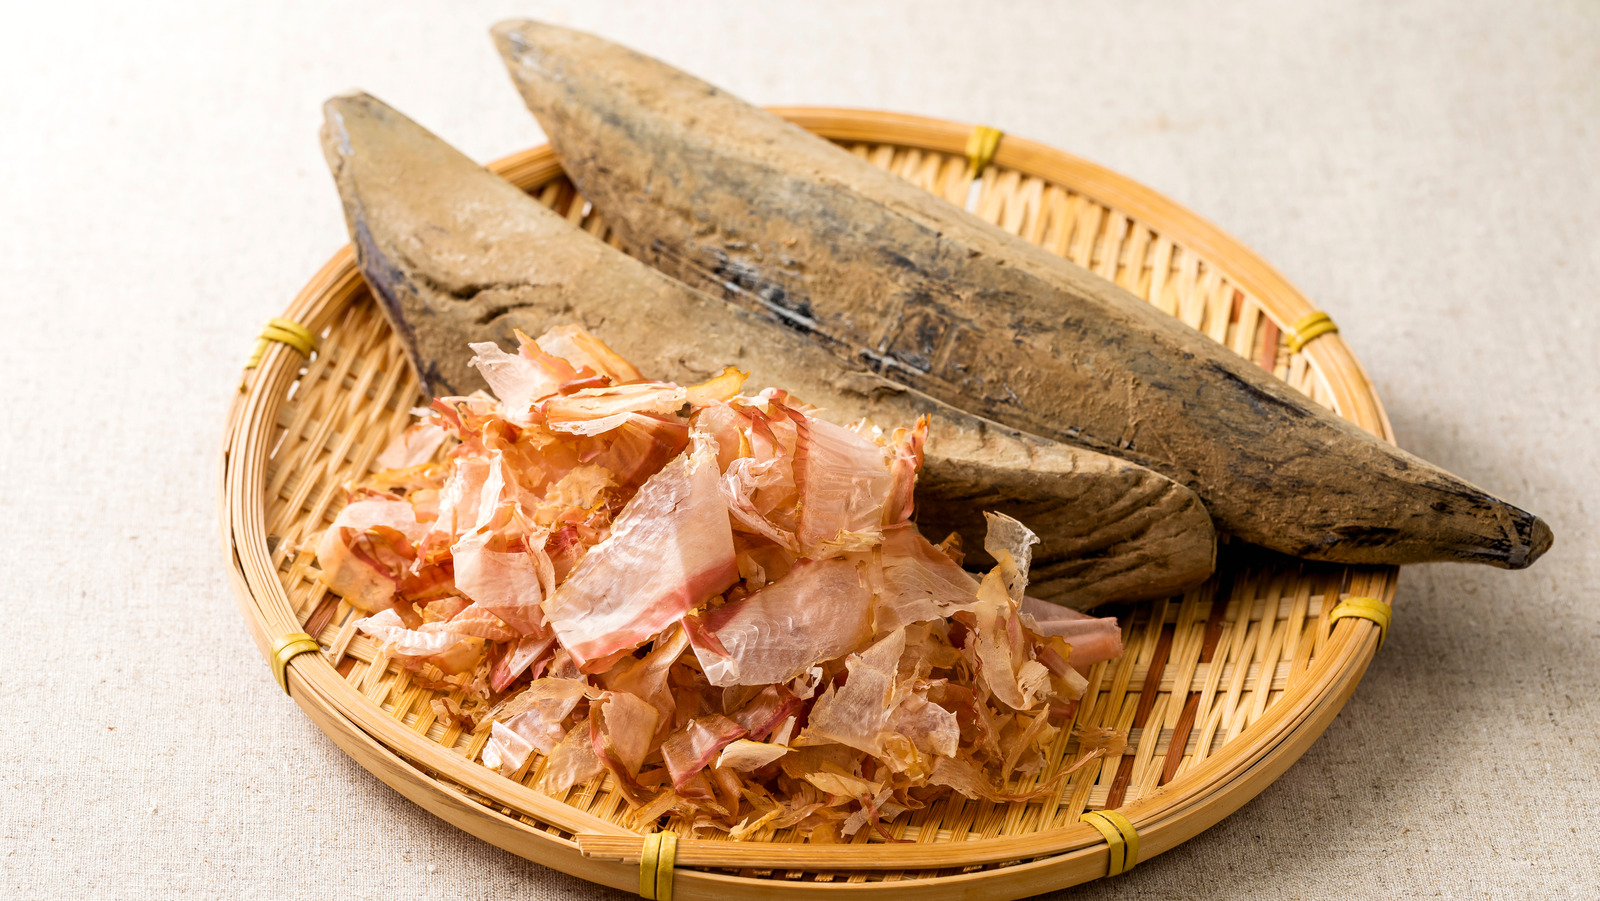 https://www.tastingtable.com/img/gallery/everything-you-need-to-know-about-katsuobushi/l-intro-1679346704.jpg